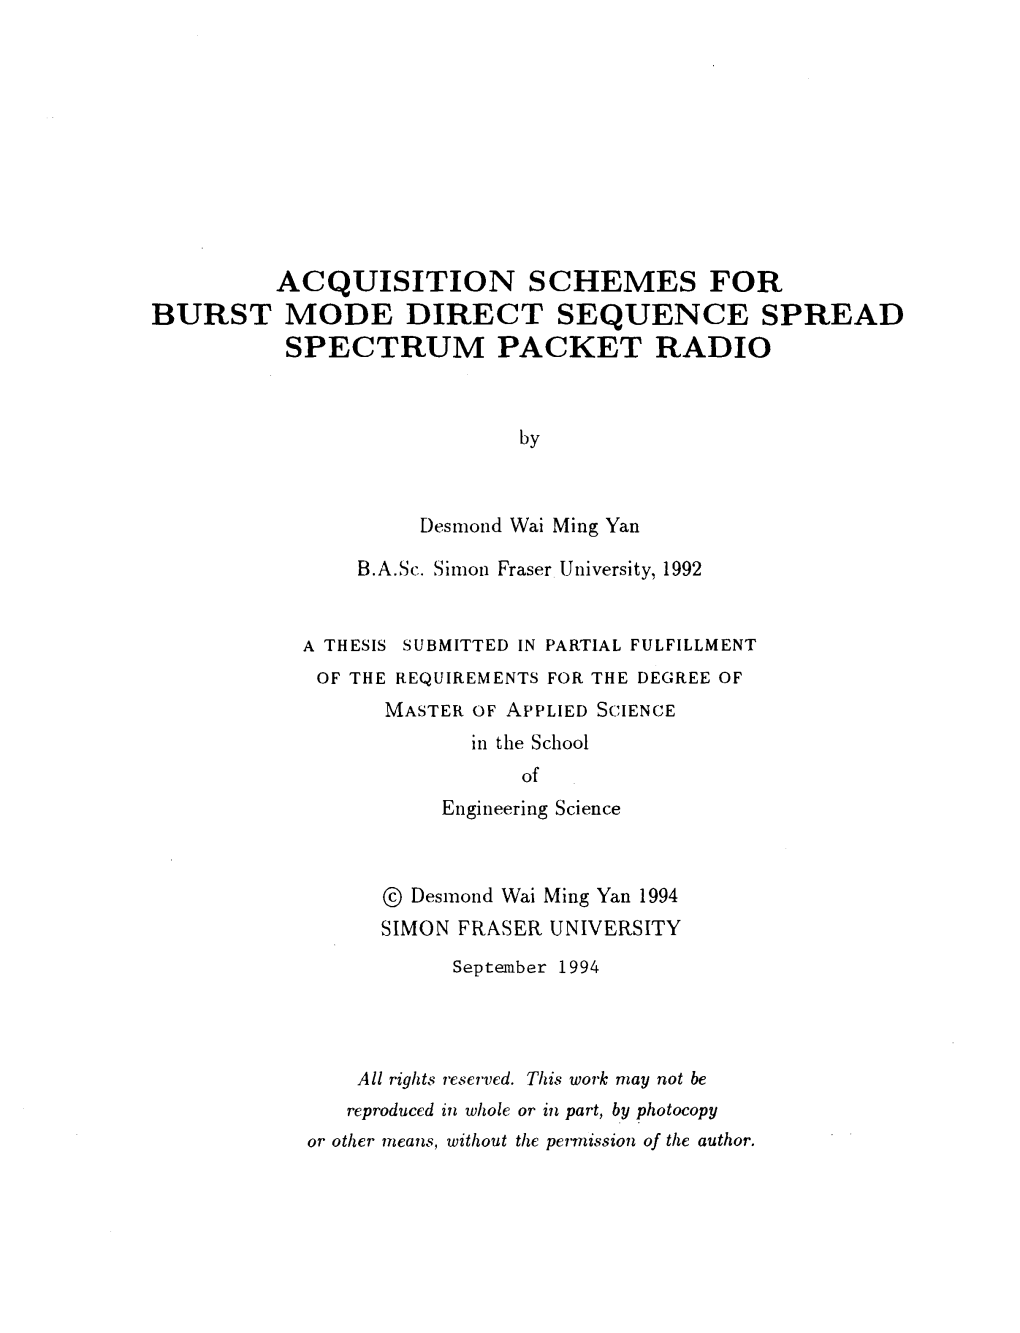 Acquisition Schemes for Burst Mode Direct Sequence Spread Spectrum Packet Radio